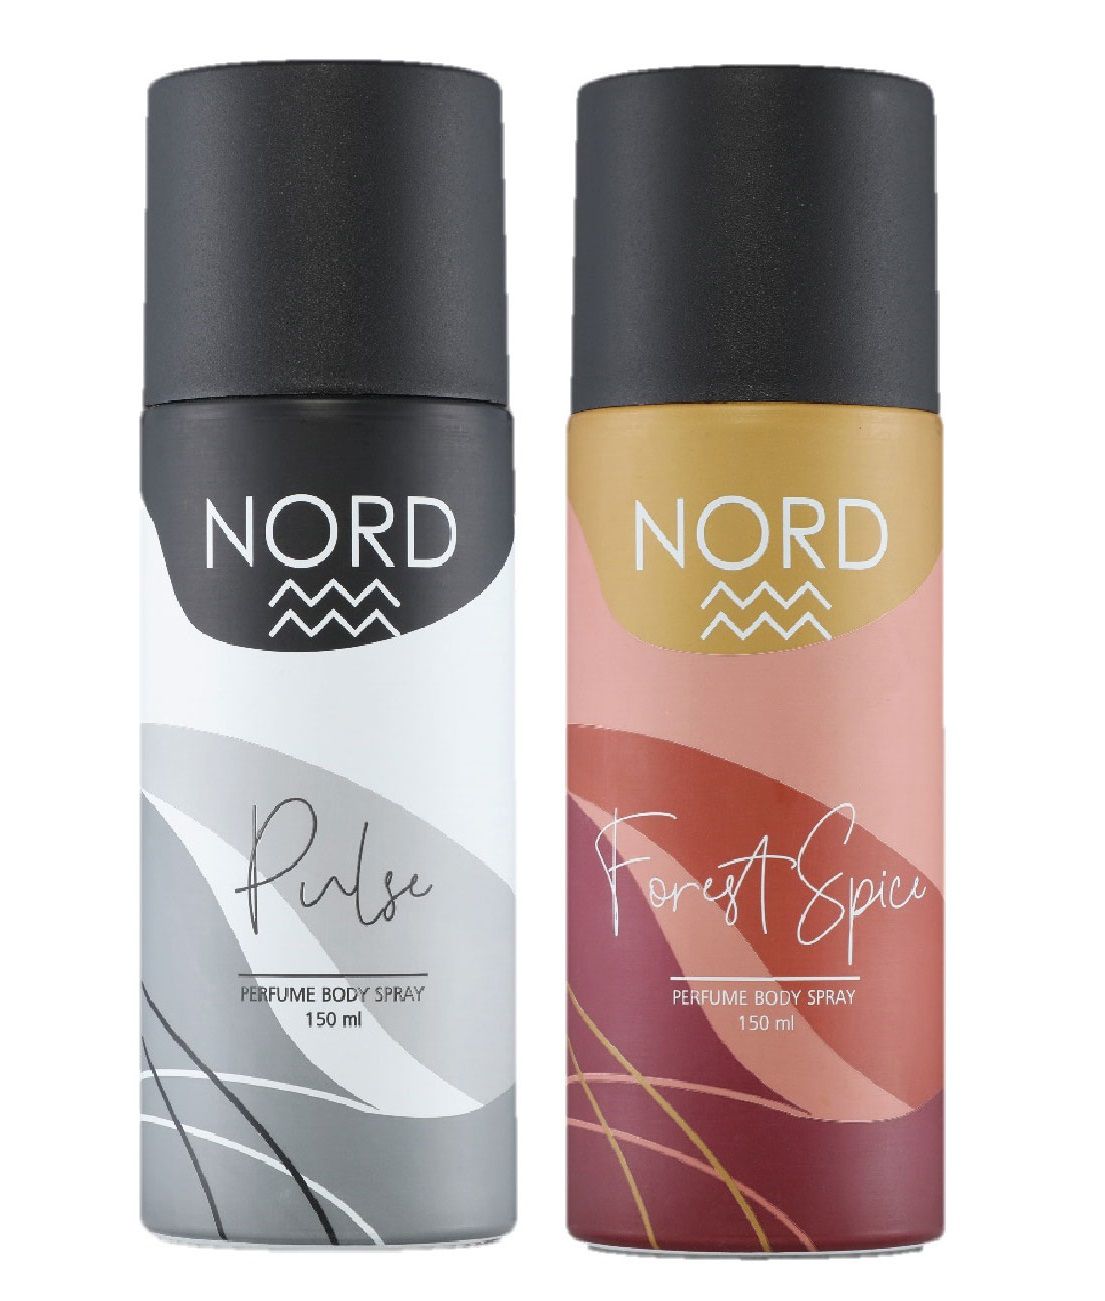     			NORD Deodorant Body Spray - Pulse and Forest Spice 150 ml each (Pack of 2)